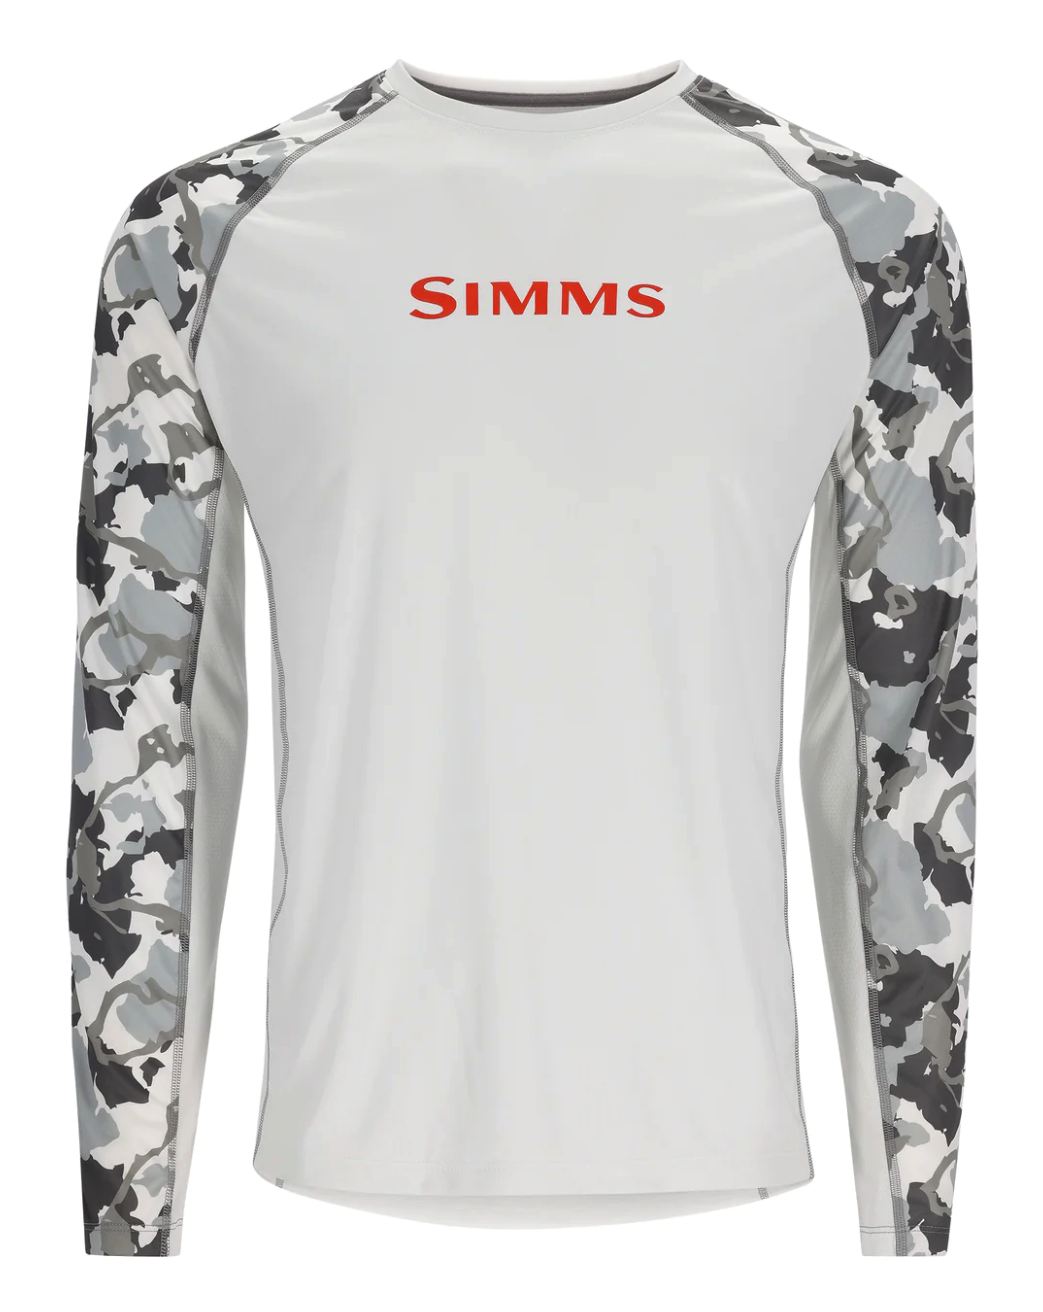 https://www.theflyfishers.com/Content/files/Simms/Shirts/ChallengerSolarCrew/WhiteRegimentCamo.png